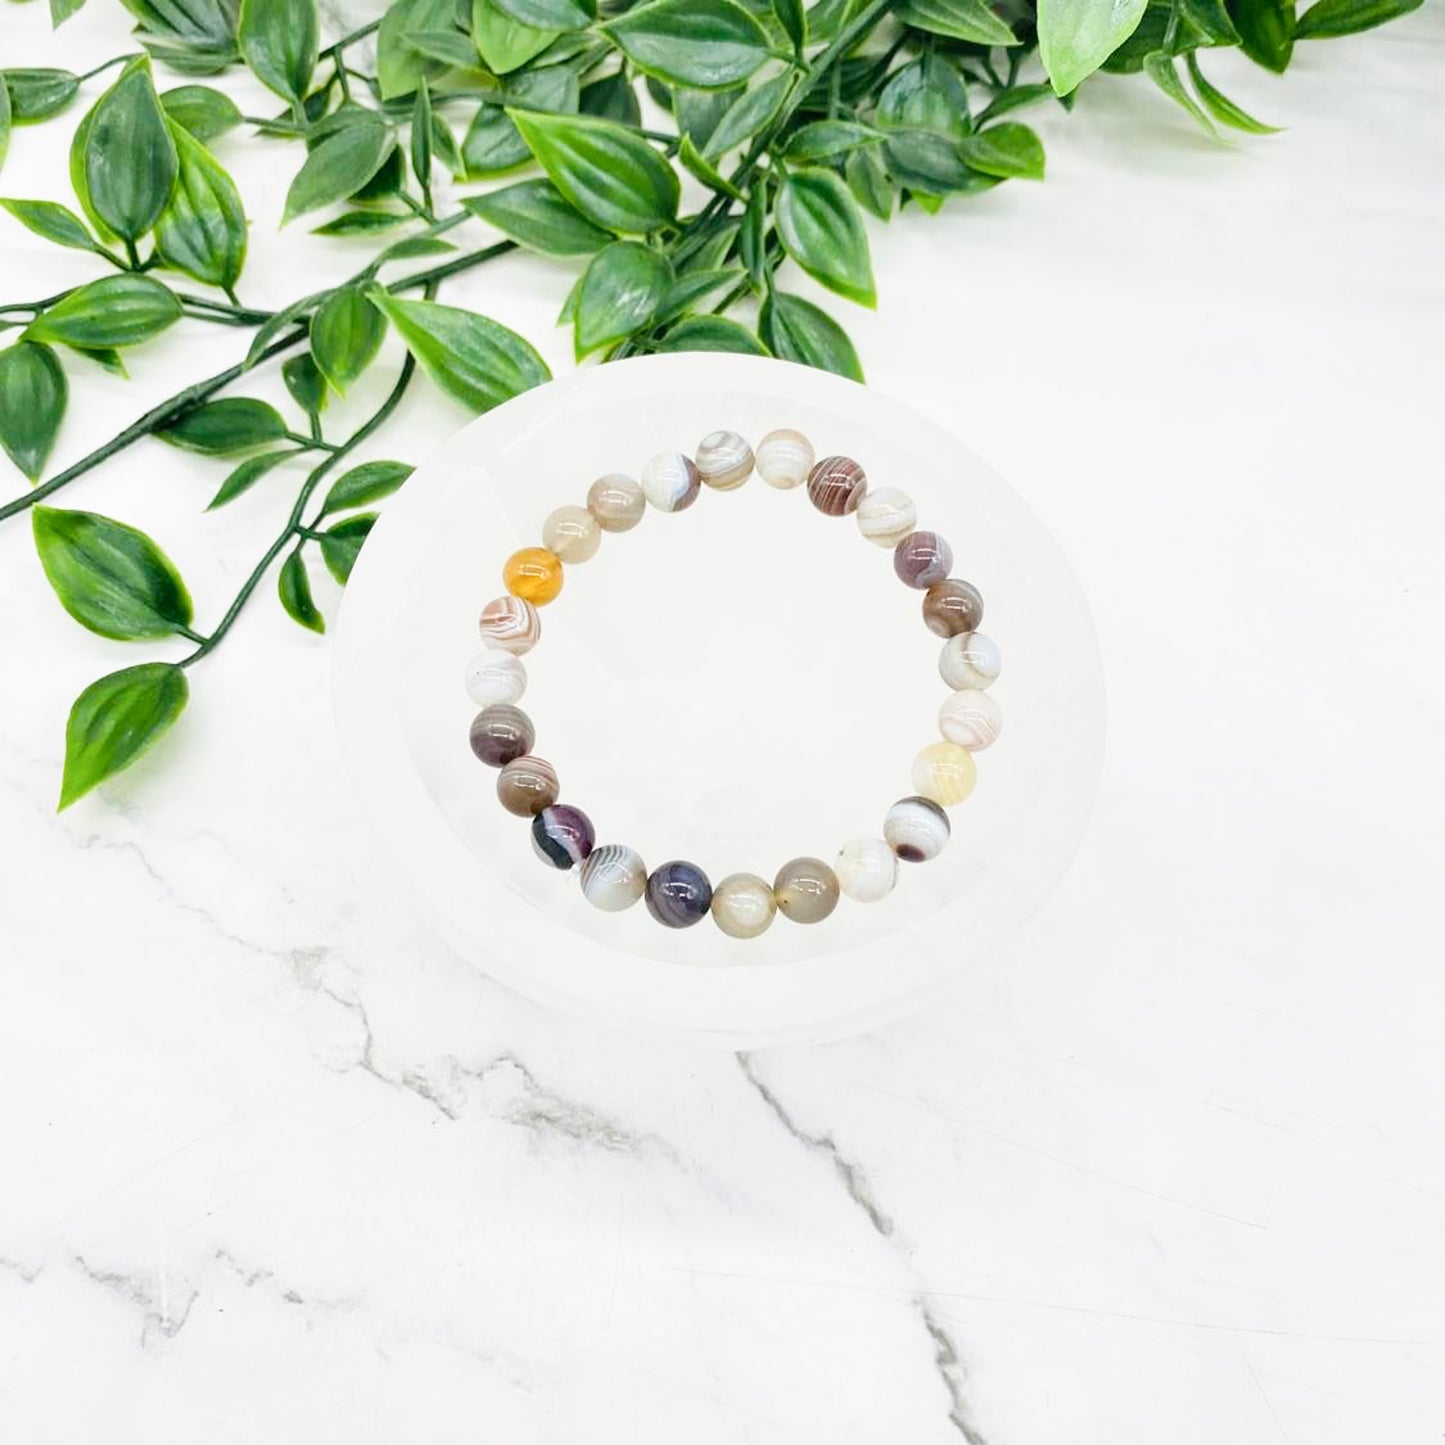 Botswana Agate Bracelet, Crystal for Self Confidence and Wealth